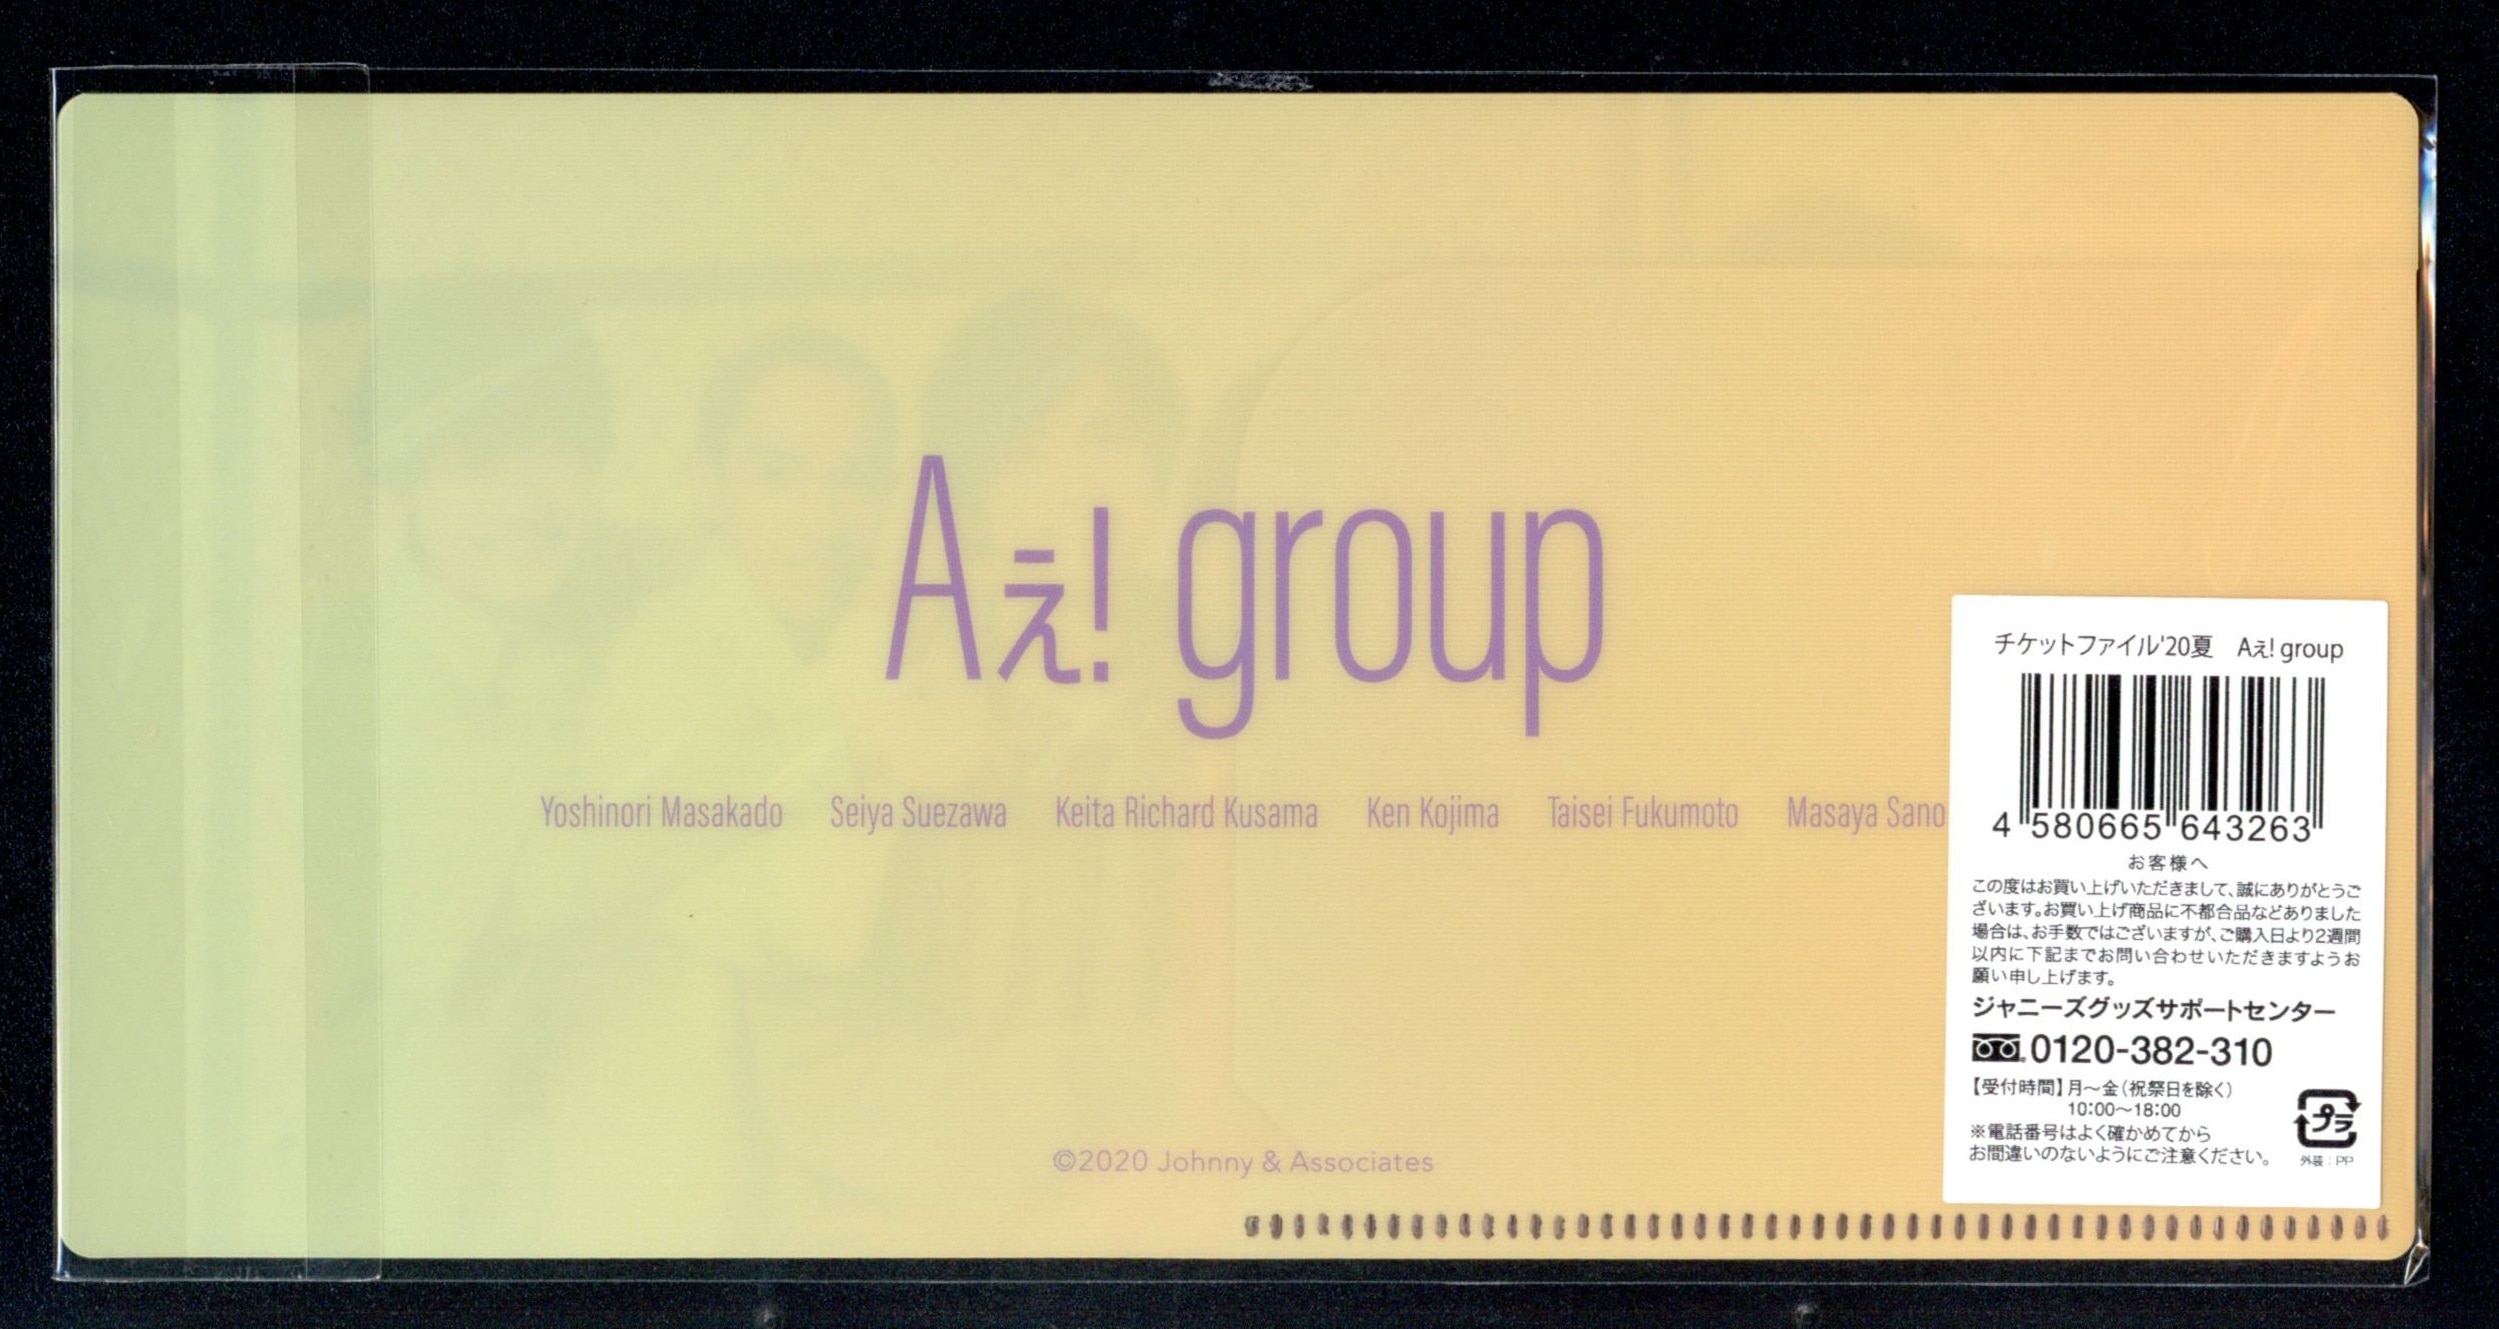 Aぇ!group チケットファイル 